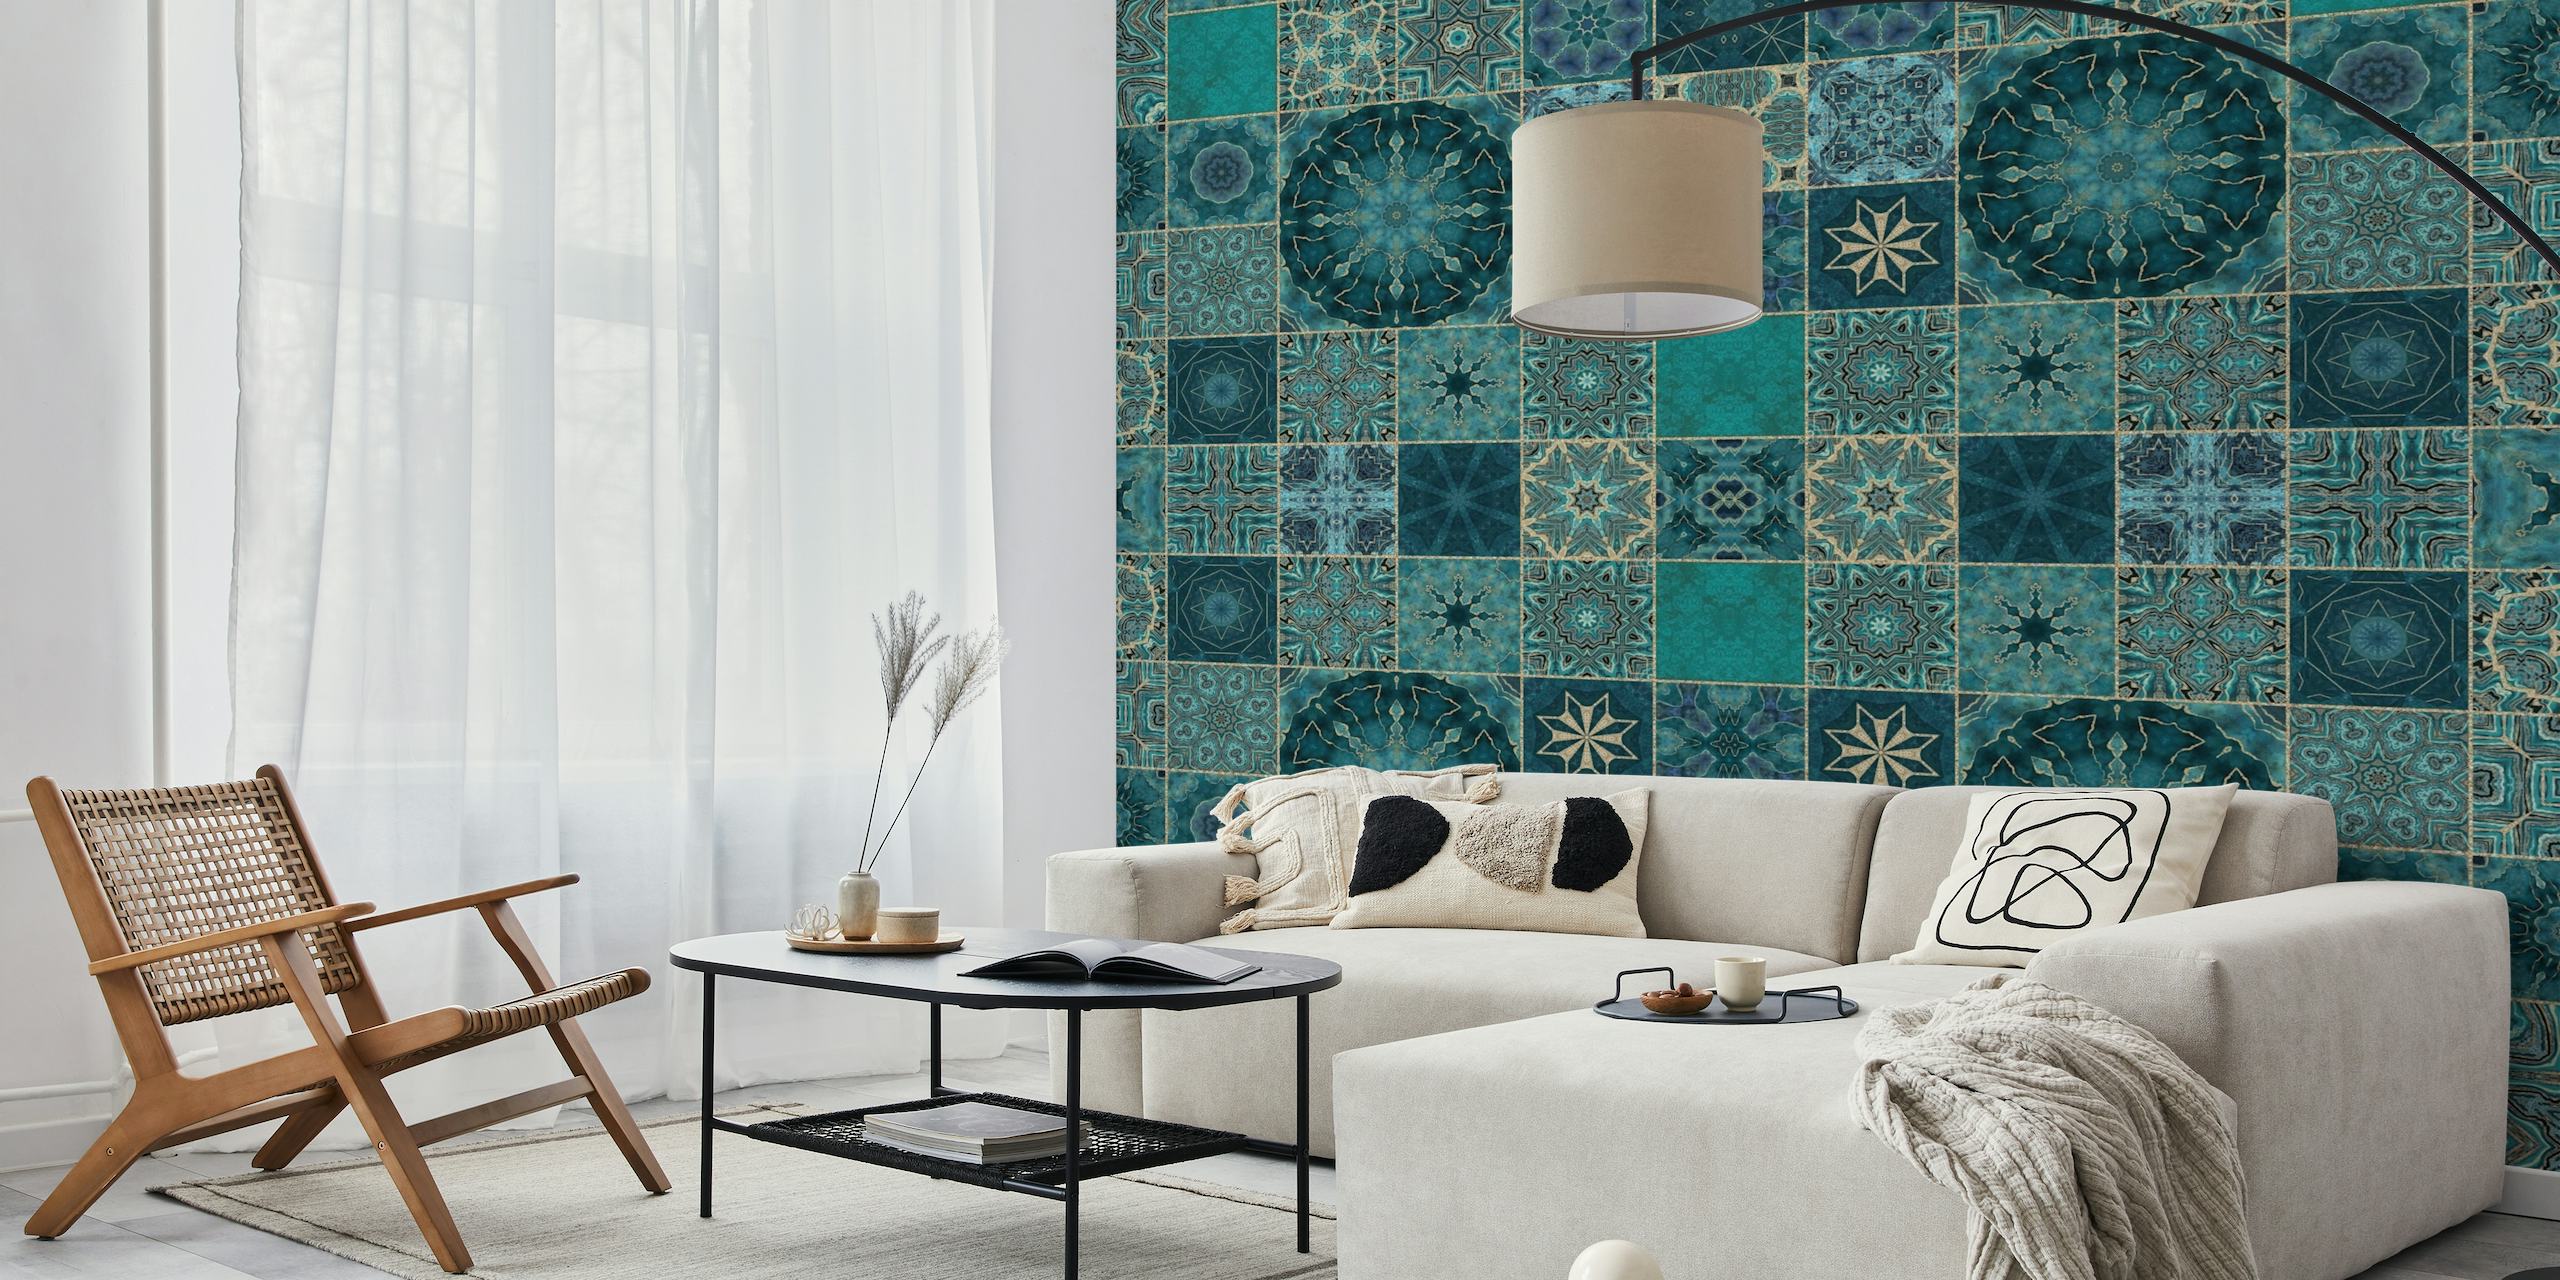 Mediterranean style wall mural with teal and gold patterns